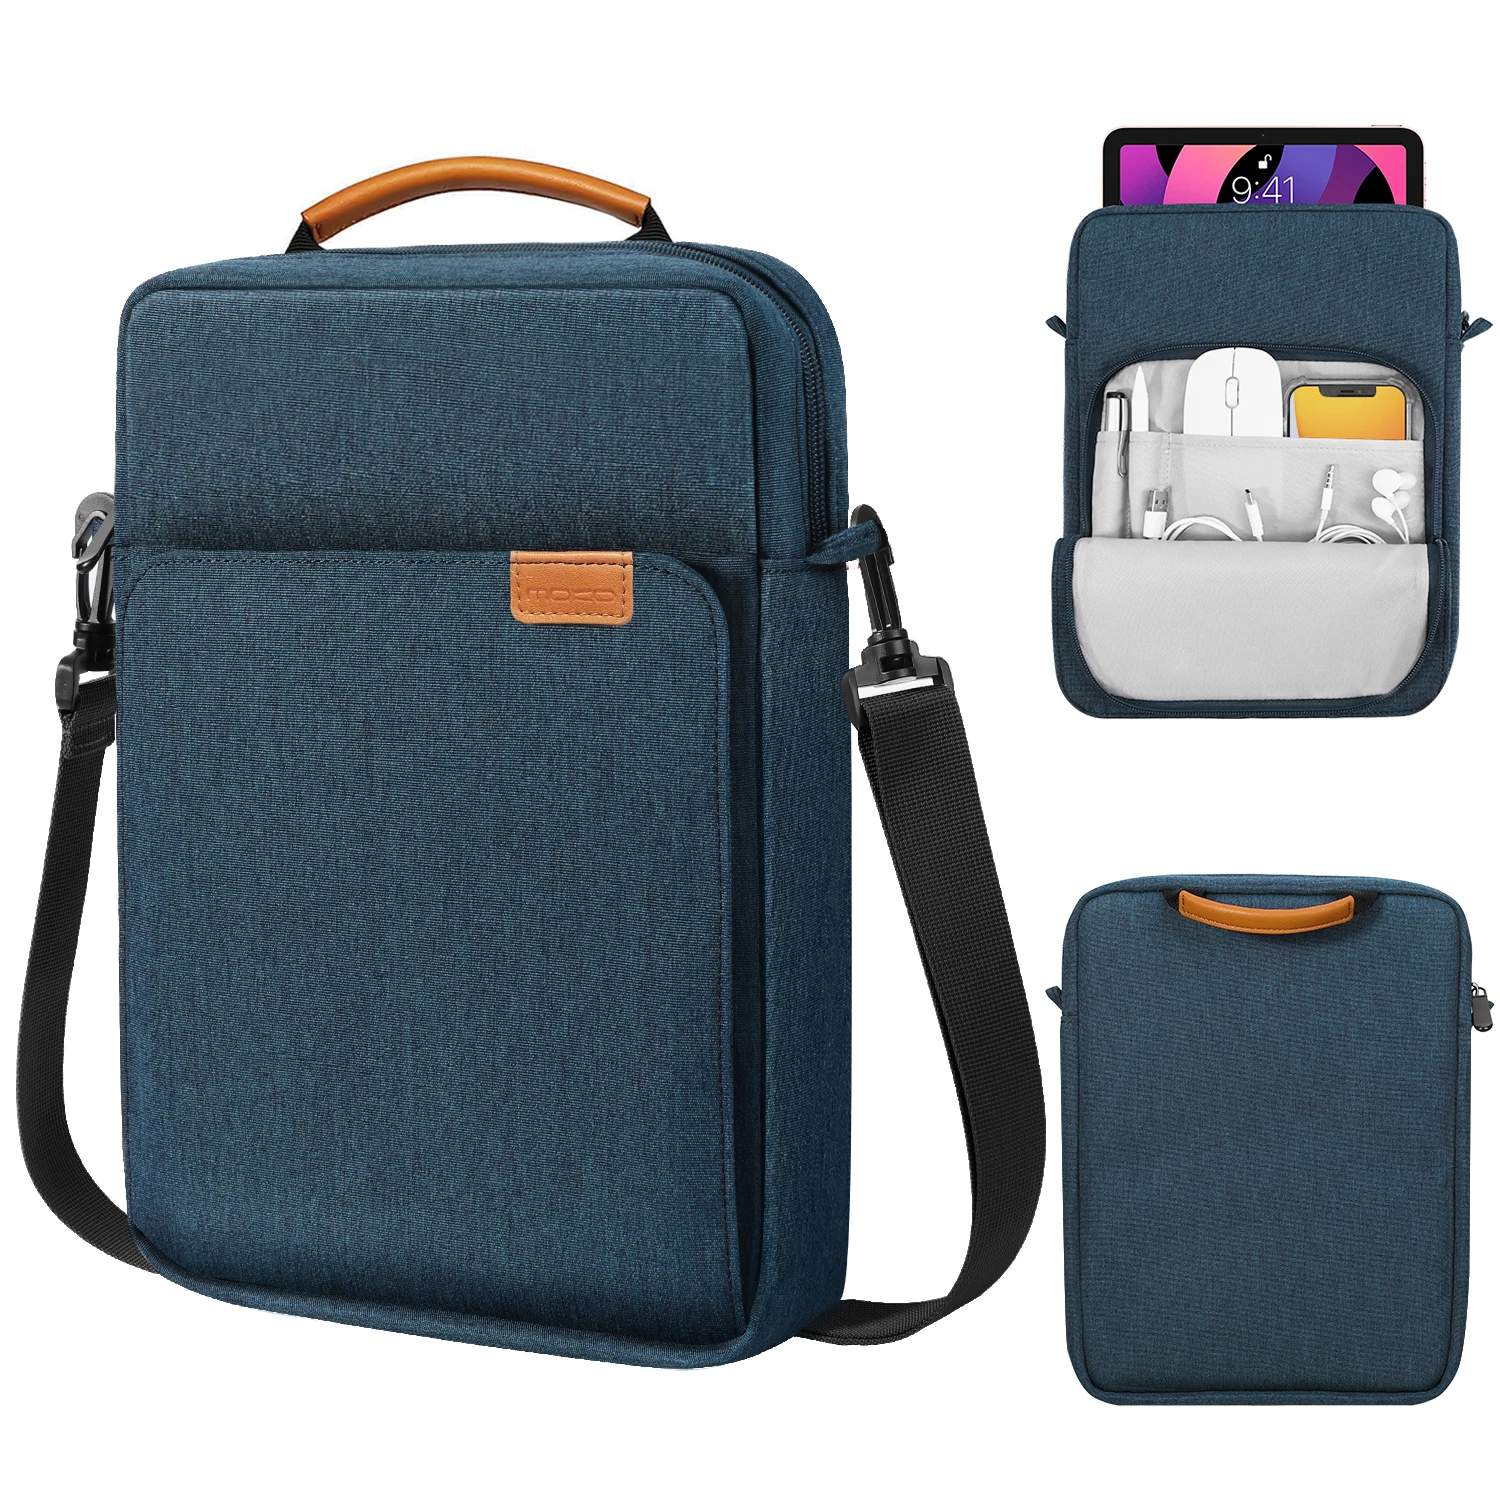 9-11 Inch Tablet Sleeve Bag Handle Carrying Case with Shoulder Strap For Samsung Galaxy Tab S6 Lite,Galaxy Tab S7,iPad Pro 11